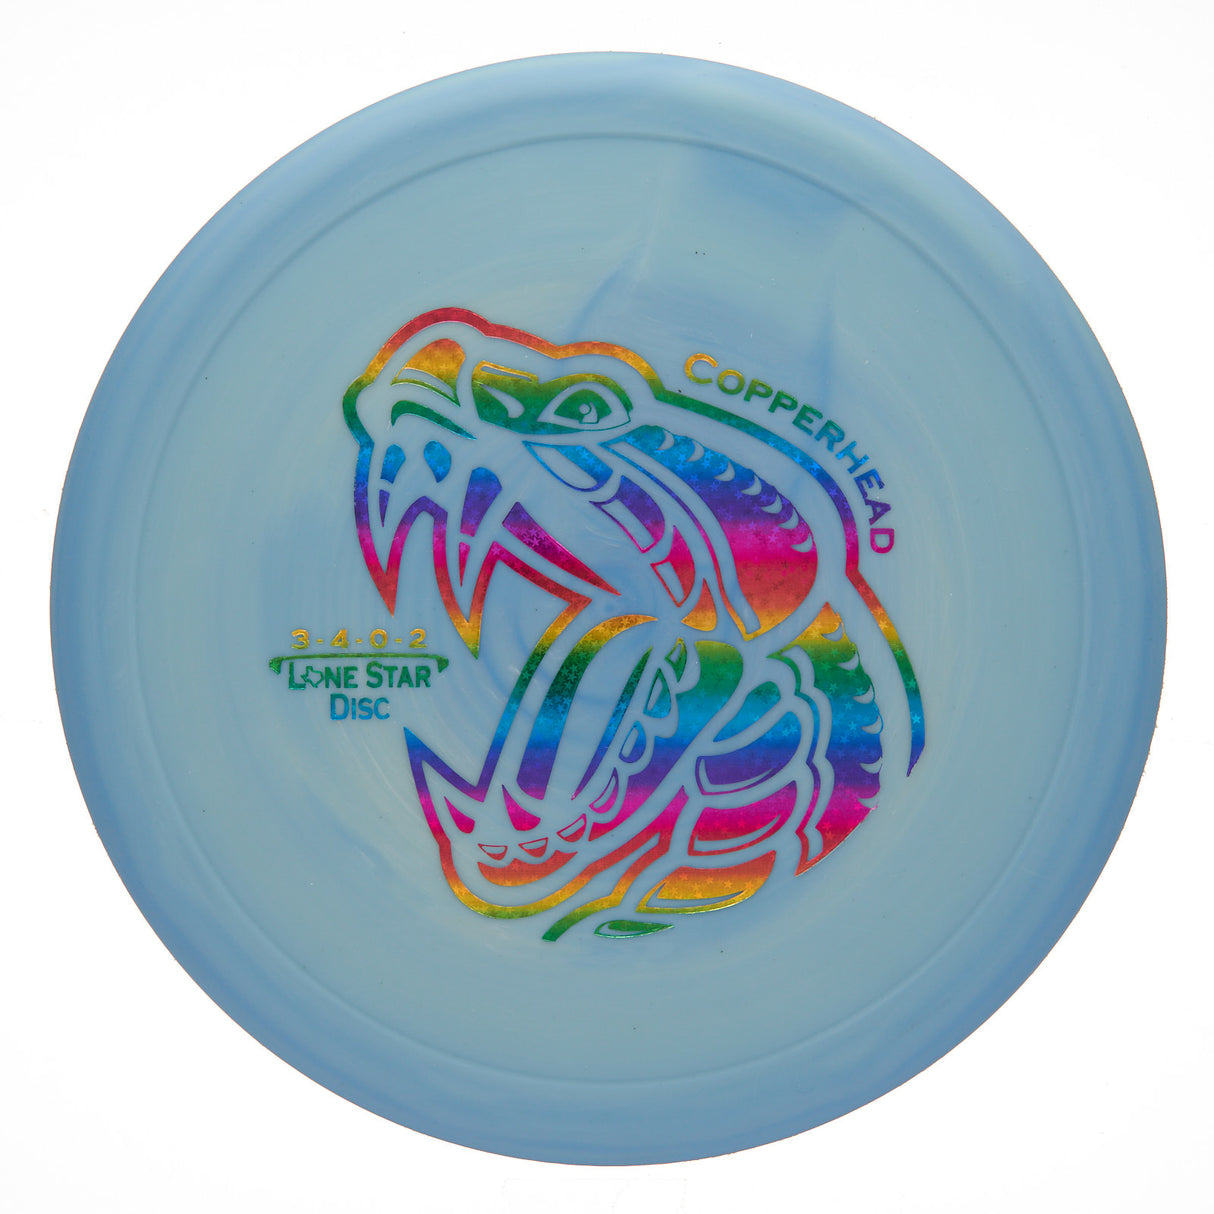 Lone Star Disc Copperhead - Artist Series Victor 1 174g | Style 0001